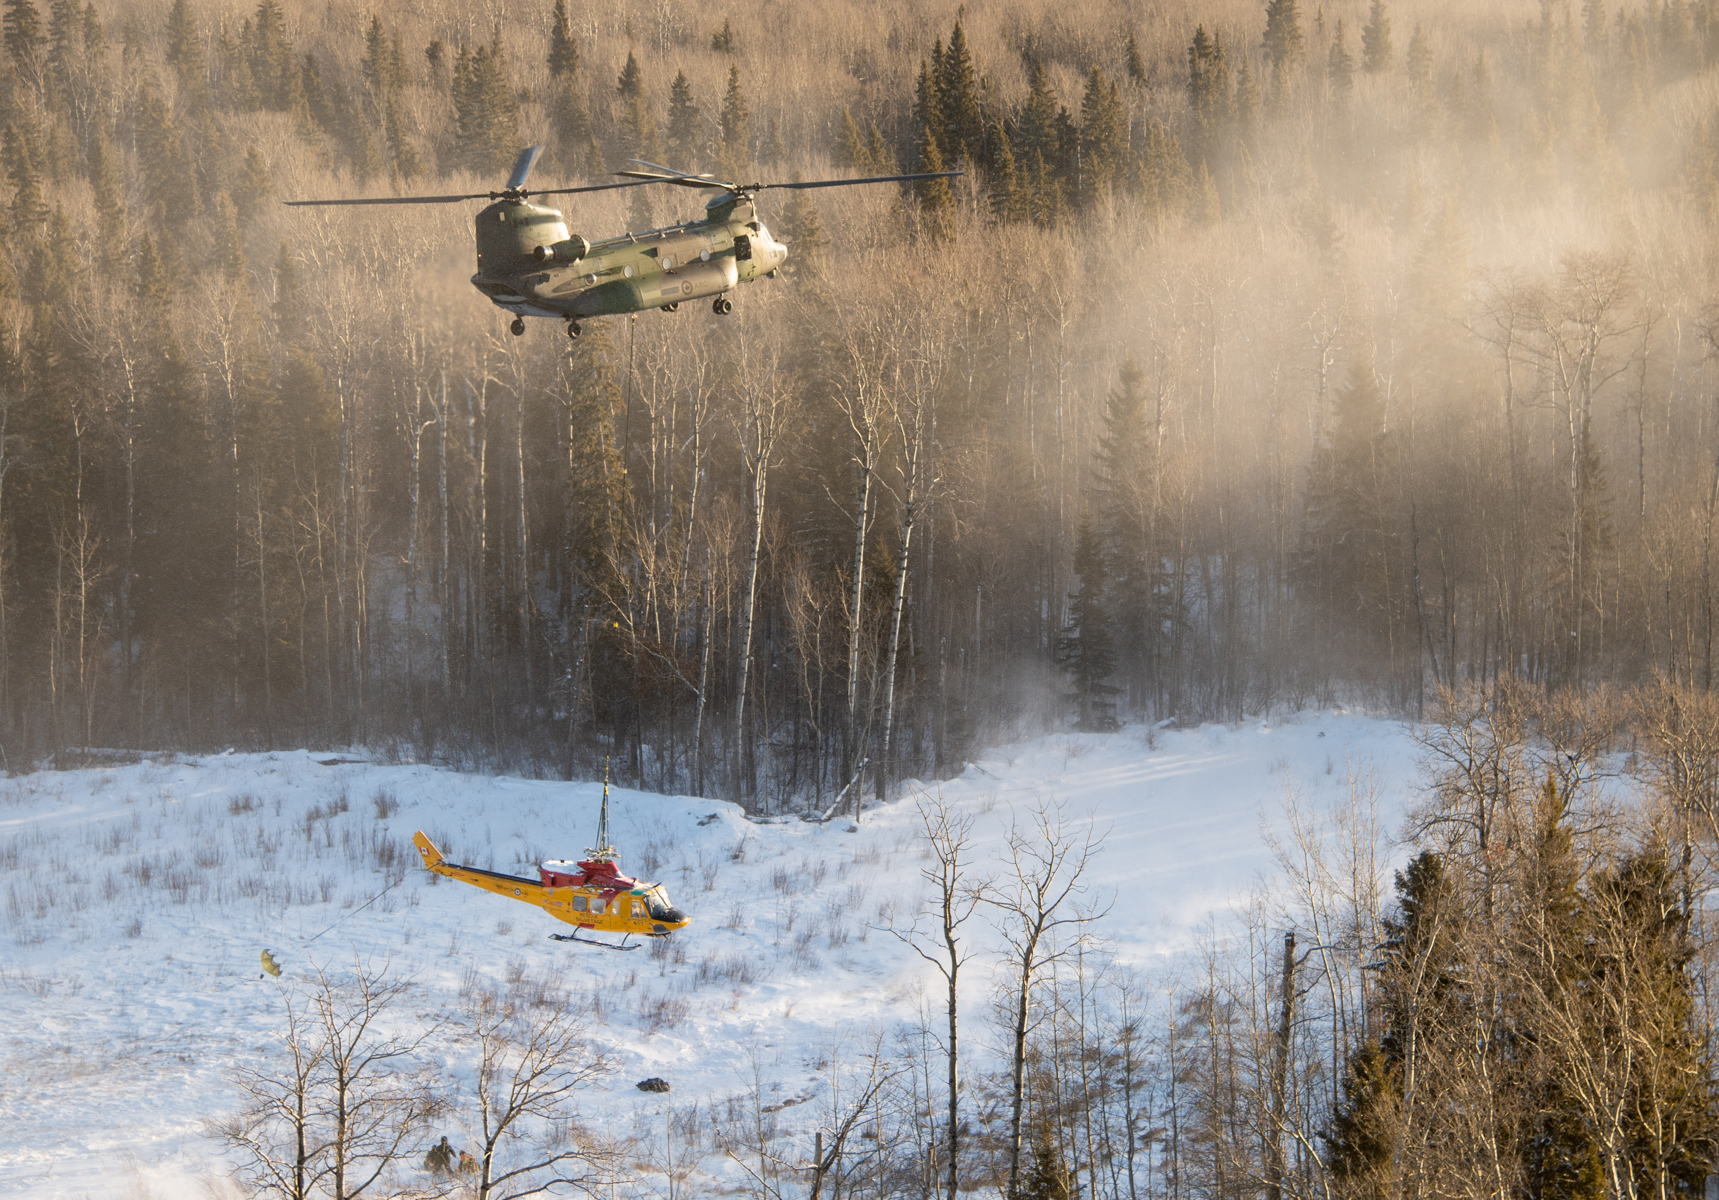 The Chinook helicopter lifts off with the Griffon slung below it. In this photo, the Griffon is not yet aligned with the Chinook and the drogue chute has not fully filled with air to steady the smaller helicopter. MCpl Amy Martin Photo